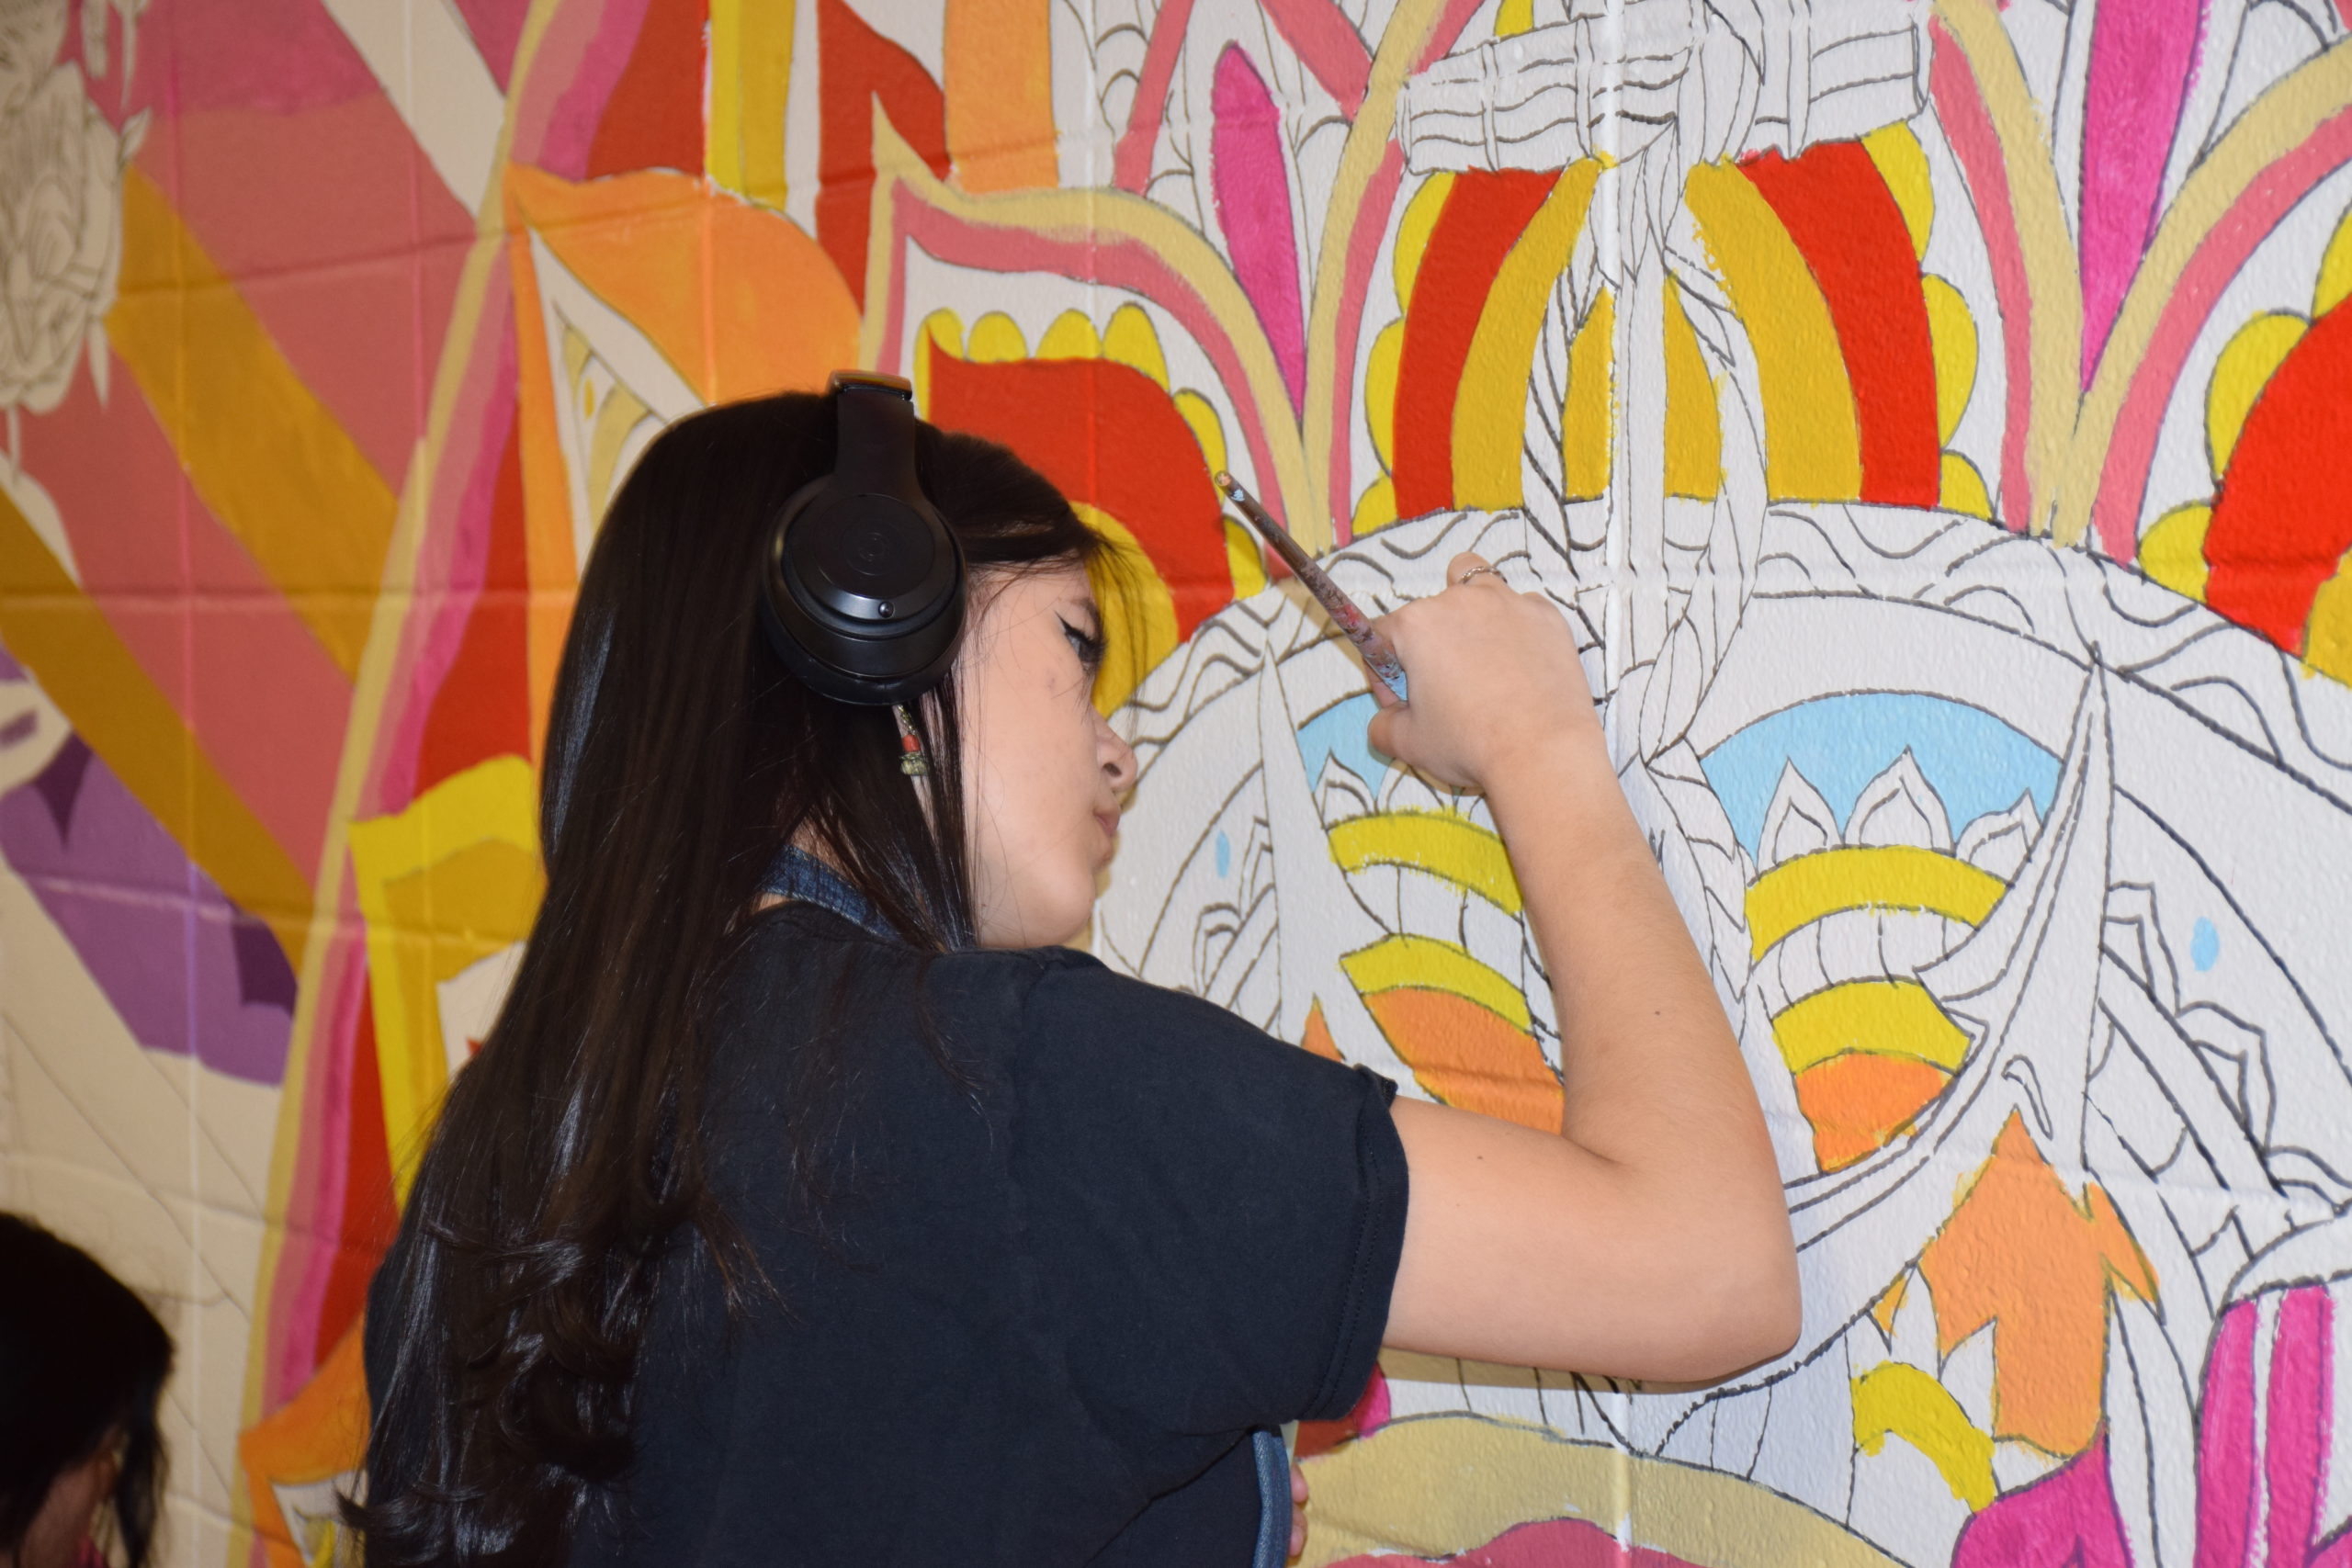 Hampton Bays High School students worked with professional muralist Joe Pimentel to design and paint a new mural in their school’s hallway.